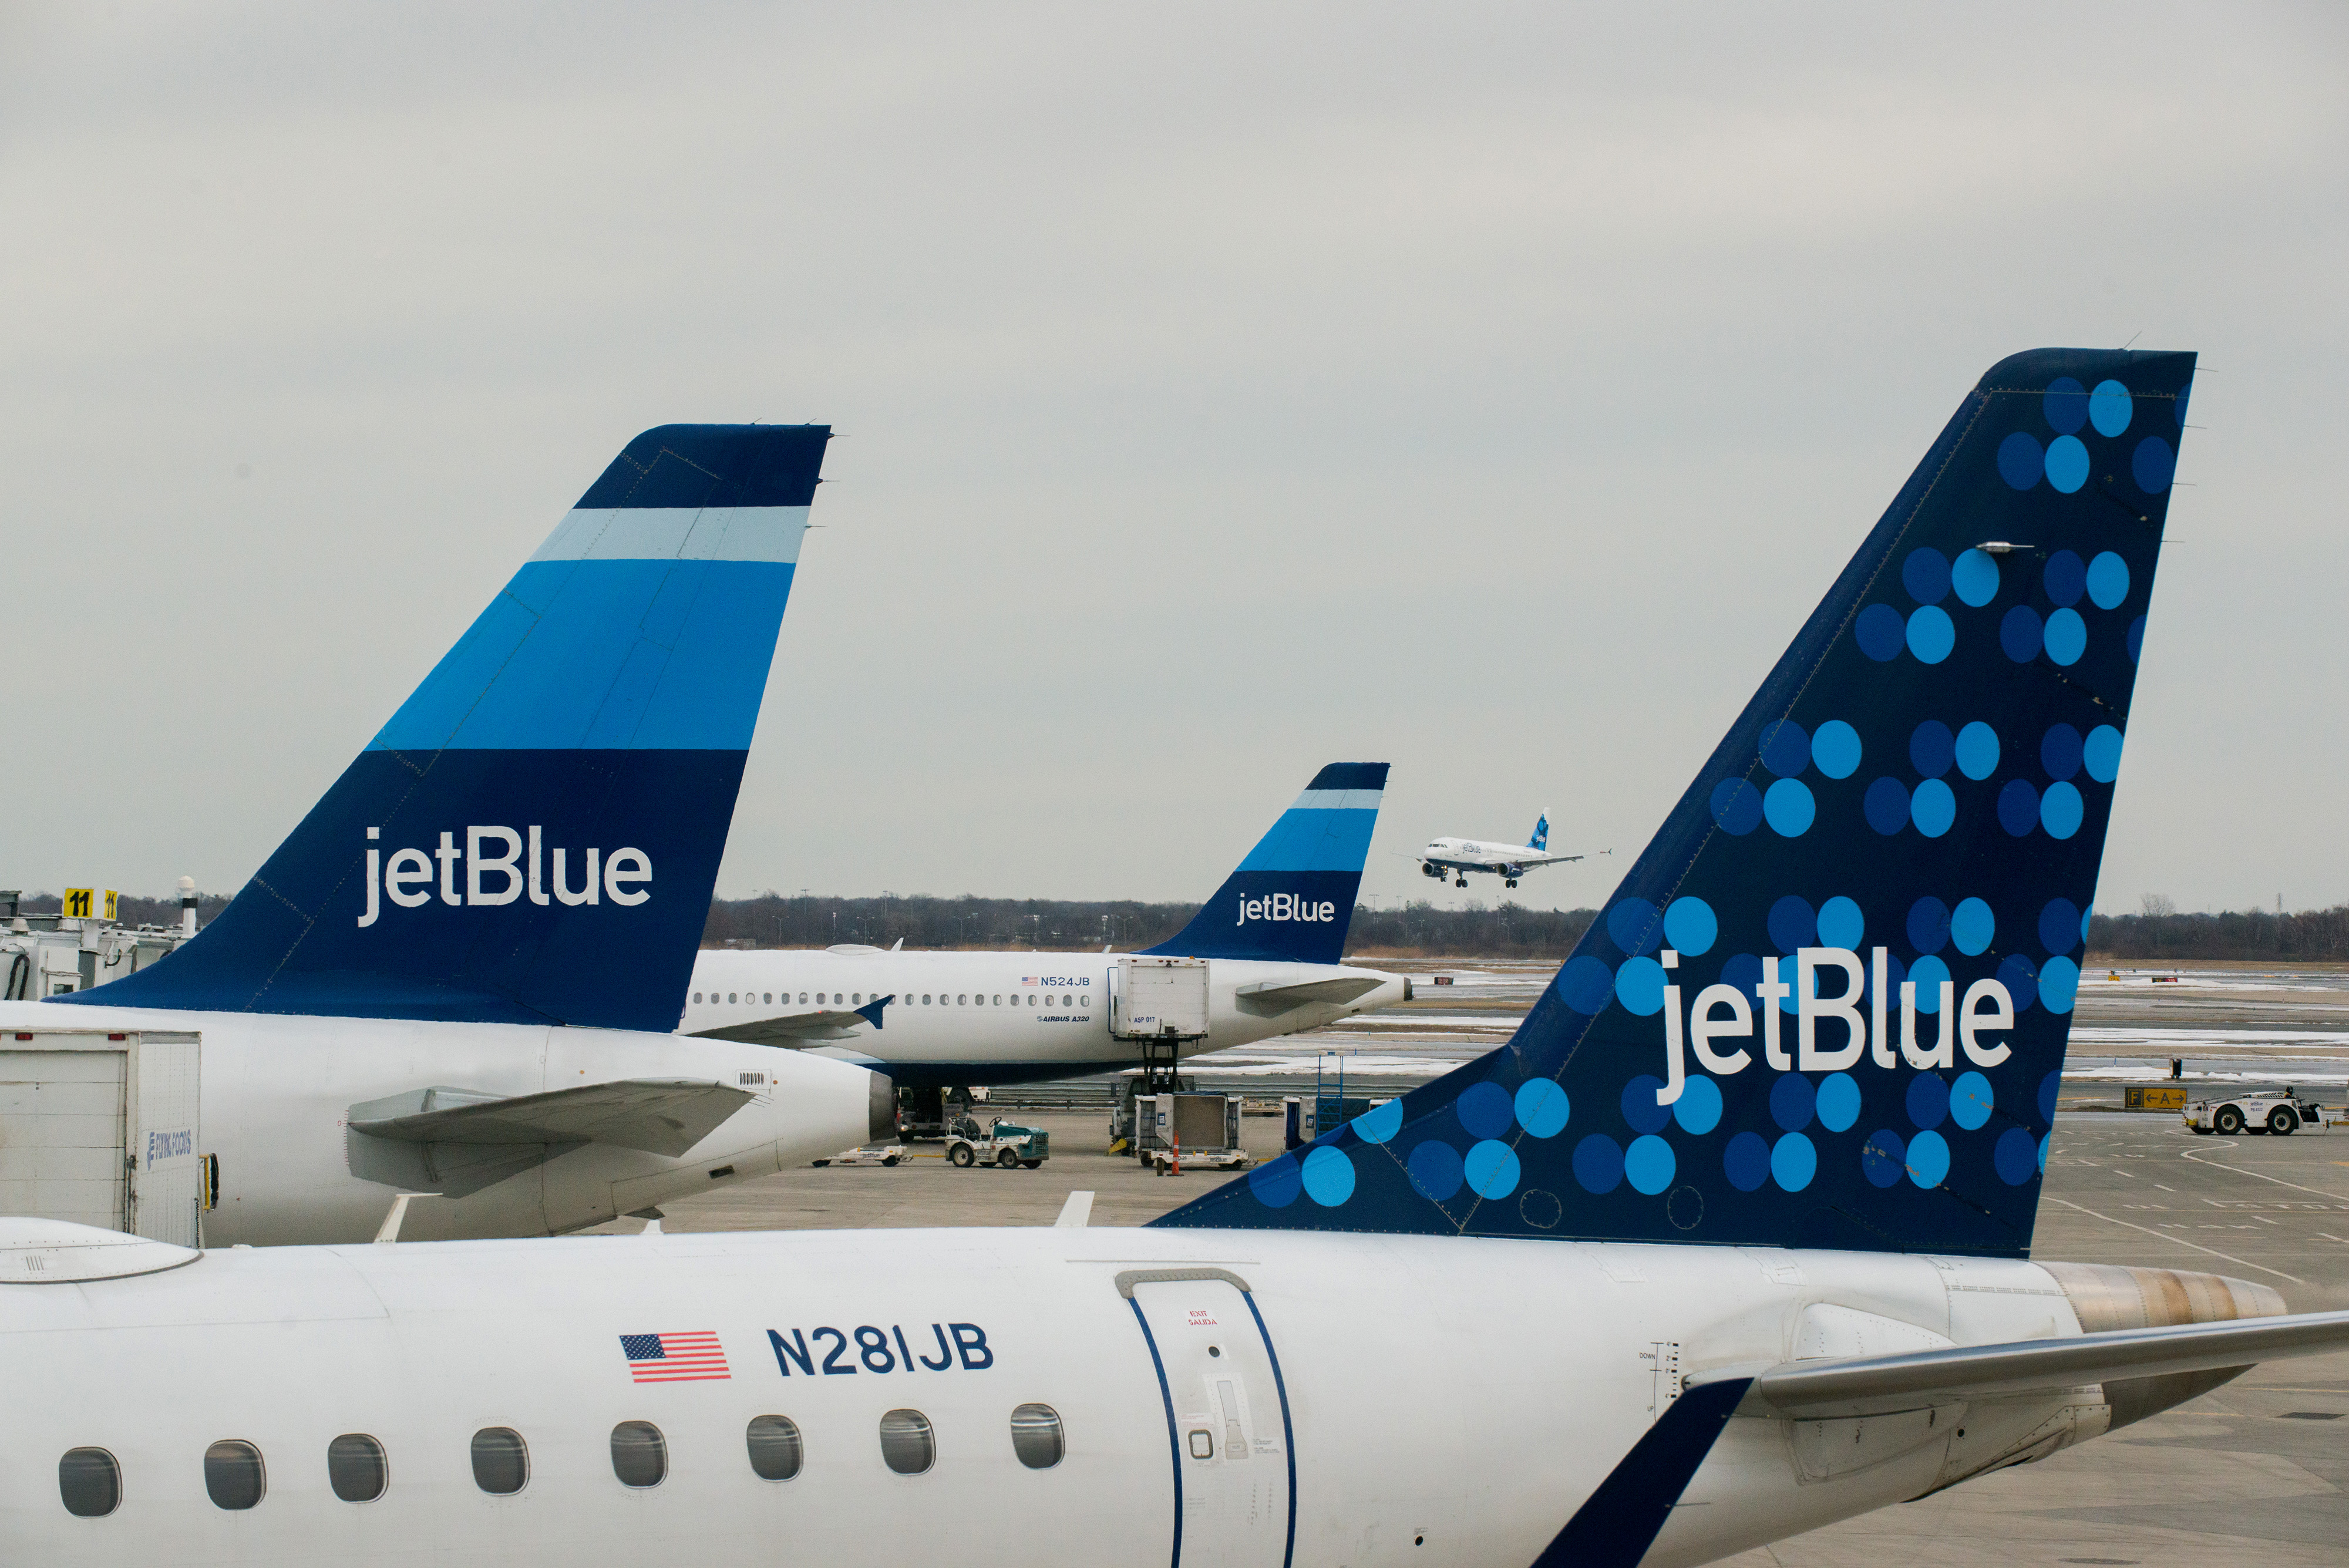 JetBlue Airways Corp. planes sit docked at the gates of Terminal 5 as another of the company's jets lands at John F. Kennedy International Airport in New York on Jan. 28, 2014. (Craig Warga—Bloomberg/Getty Images)